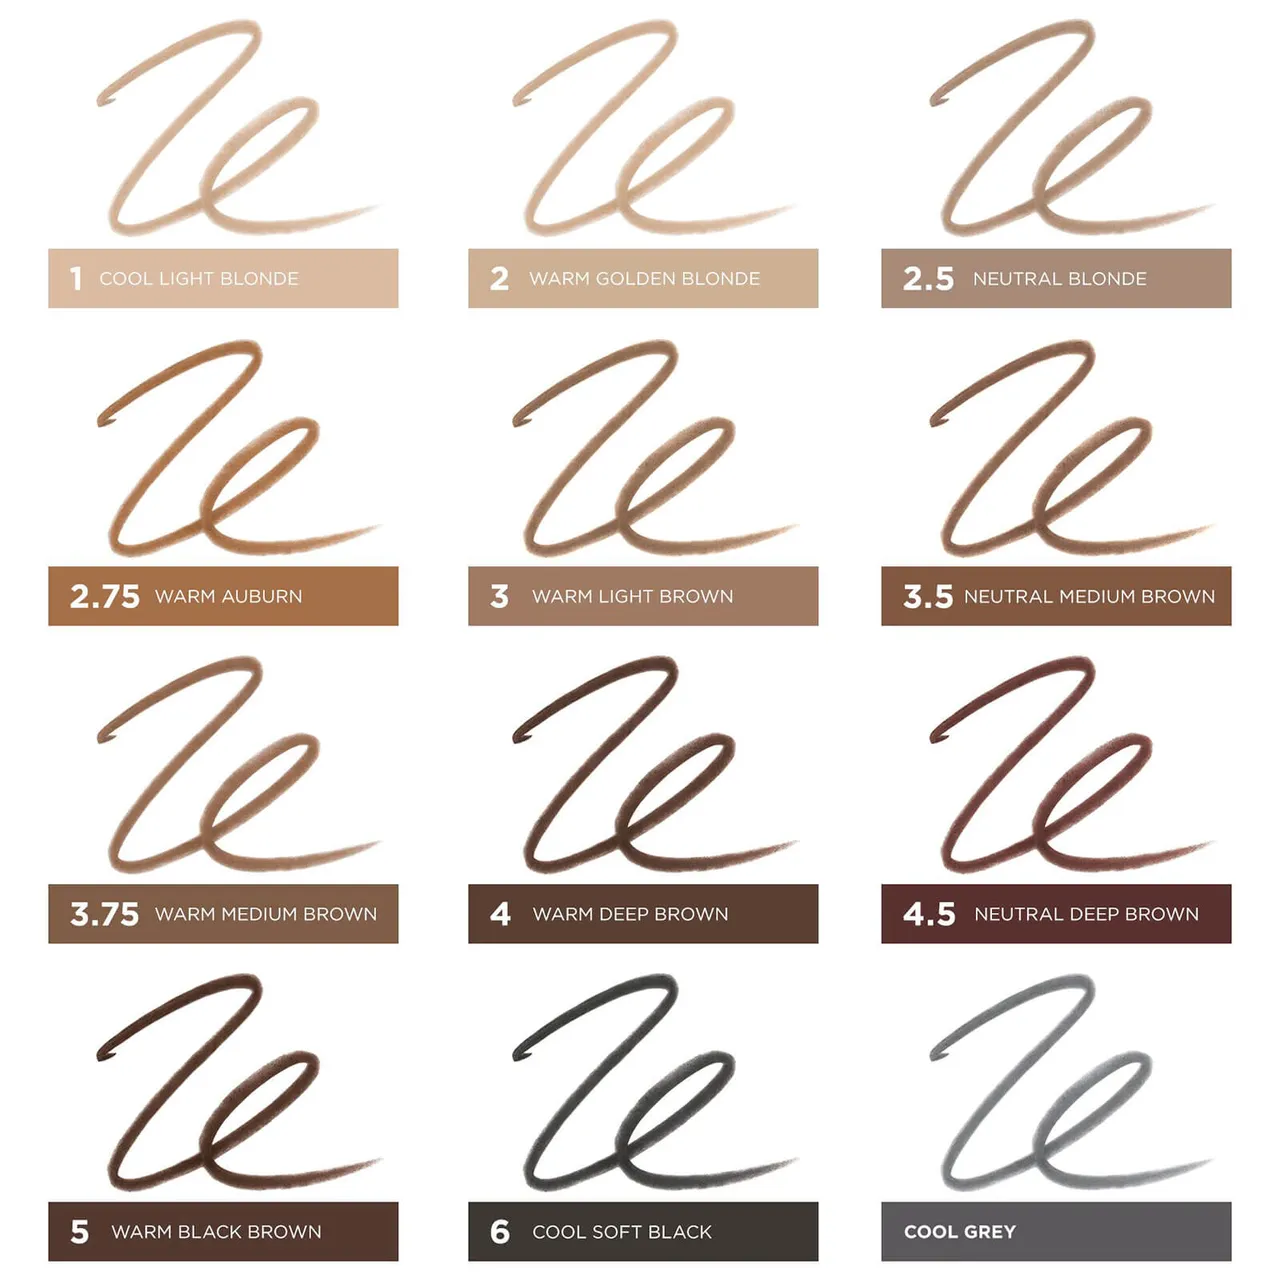 benefit Precisely, My Brow Pencil Mini (Various Shades) - 03